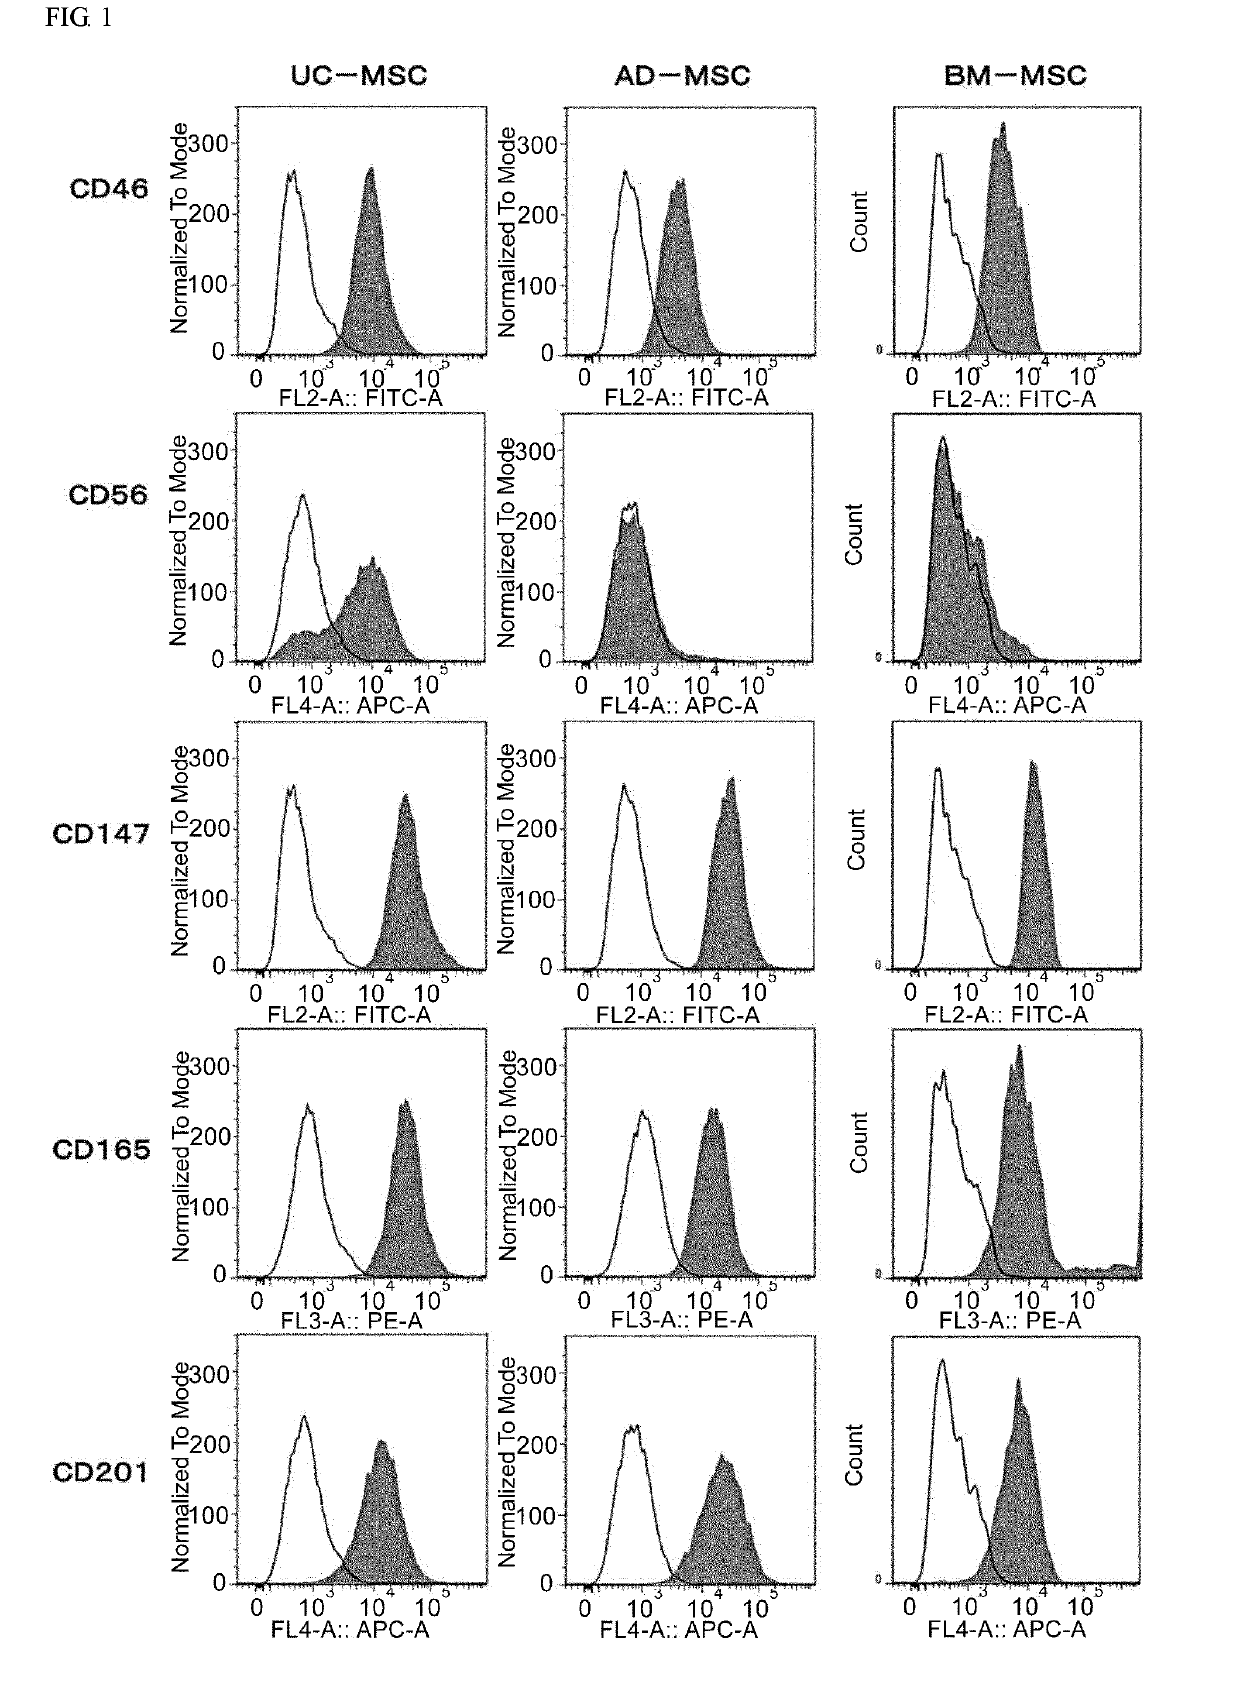 Mesenchymal stem cell expressing at least one cell surface marker selected from the group consisting of cd201, cd46, cd56, cd147, and cd165, method for preparing the same, pharmaceutical composition containing the mesenchymal stem cells, and method for preparing the same